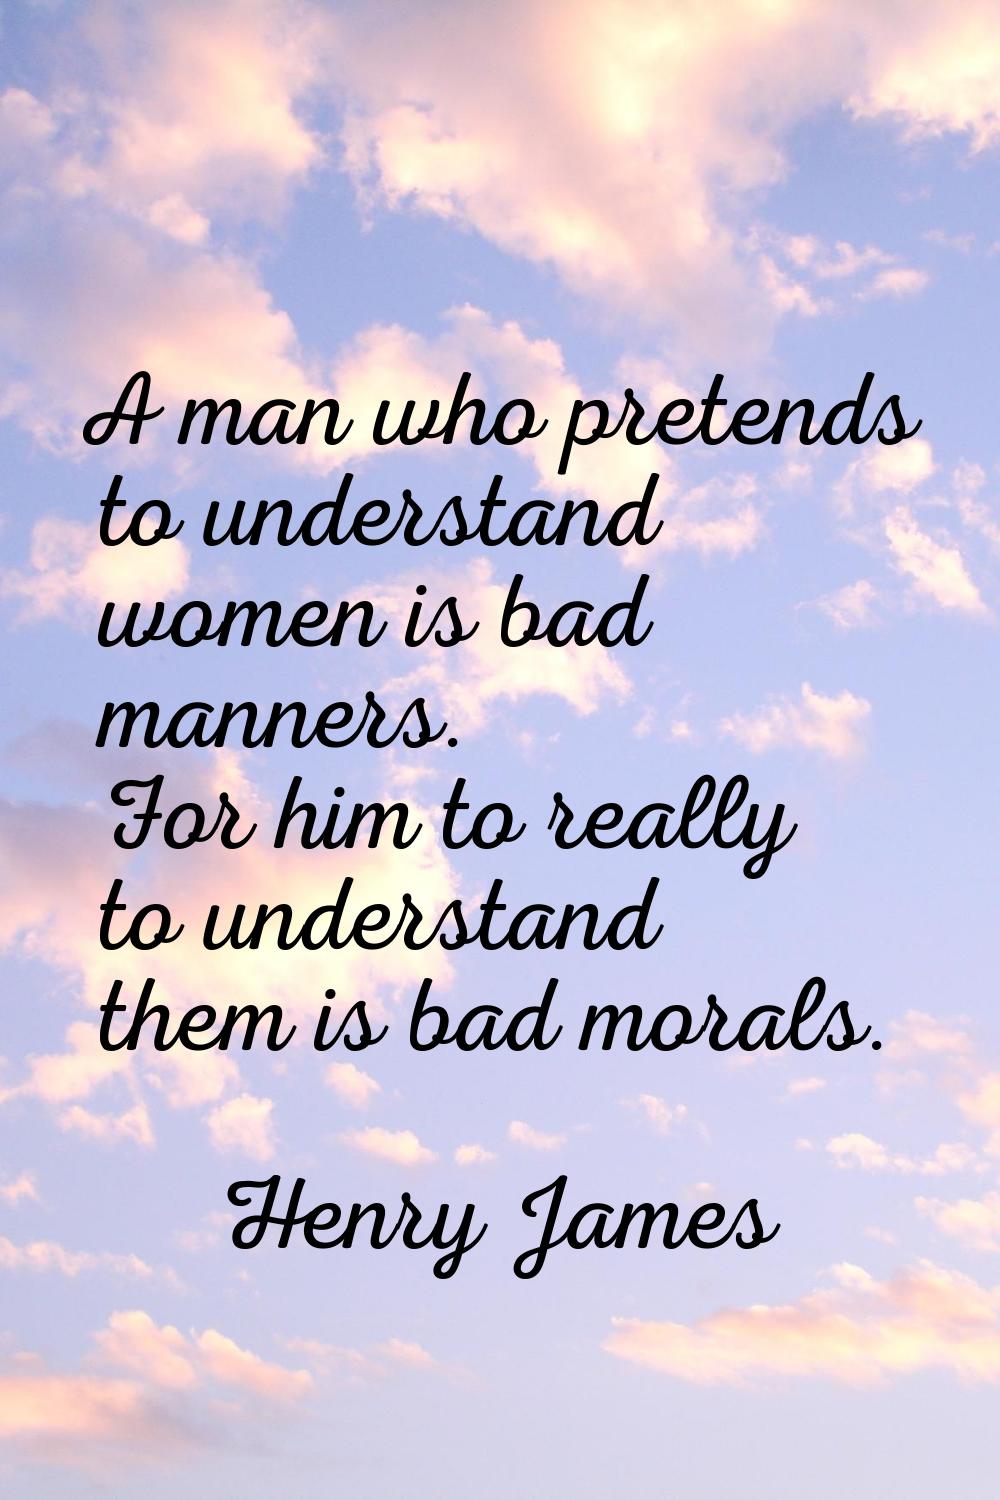 A man who pretends to understand women is bad manners. For him to really to understand them is bad 